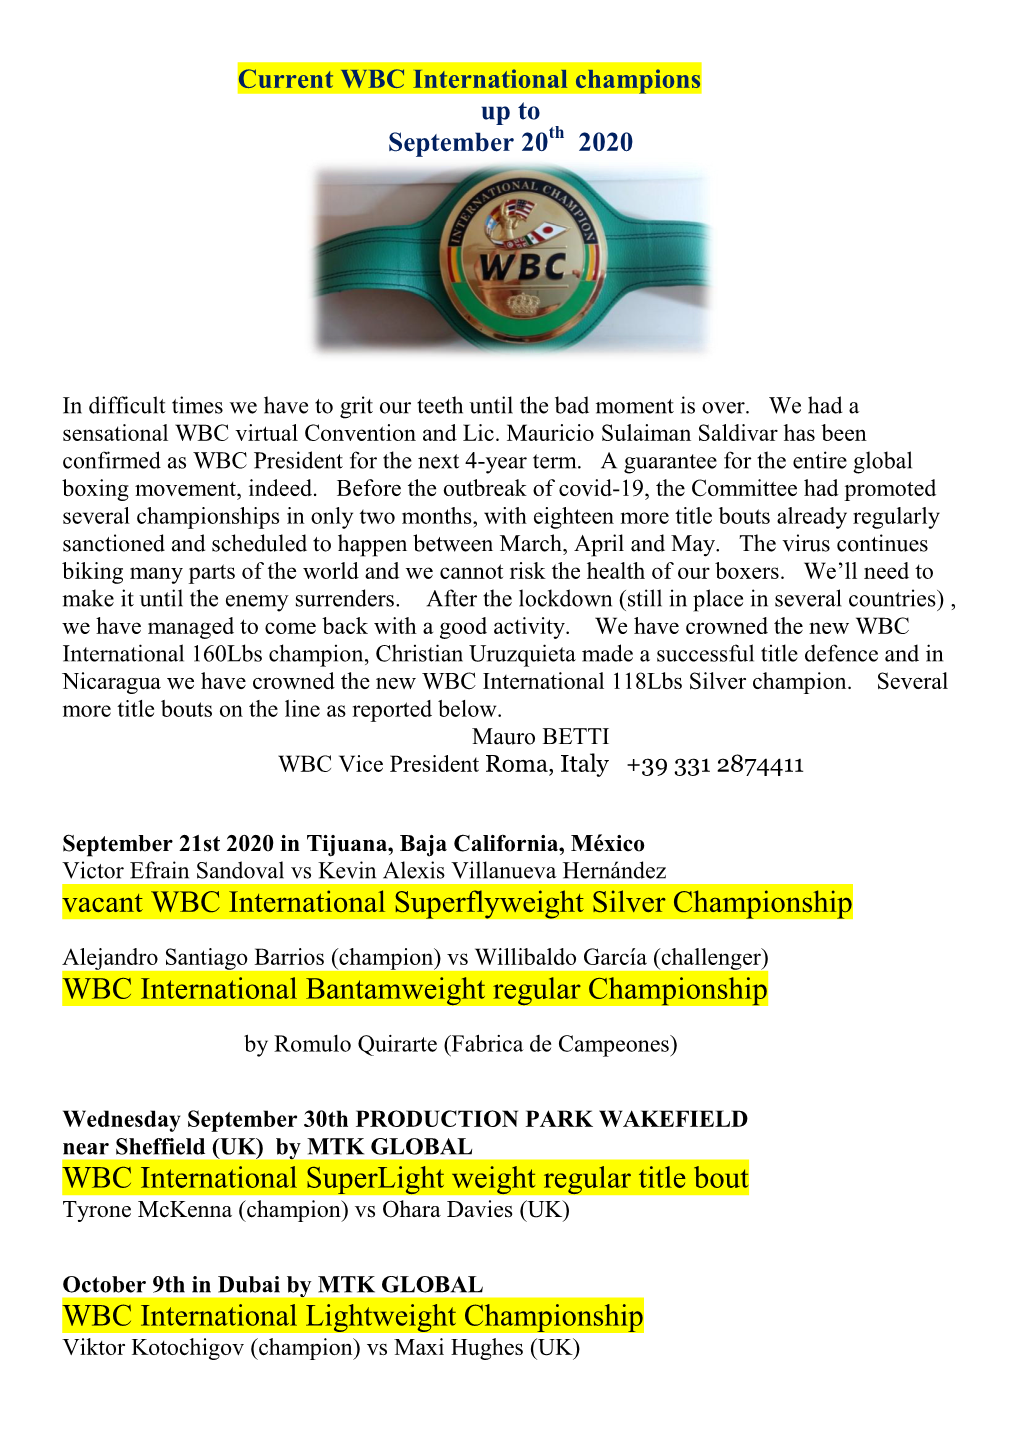 Current WBC International Champions up to September 20Th 2020